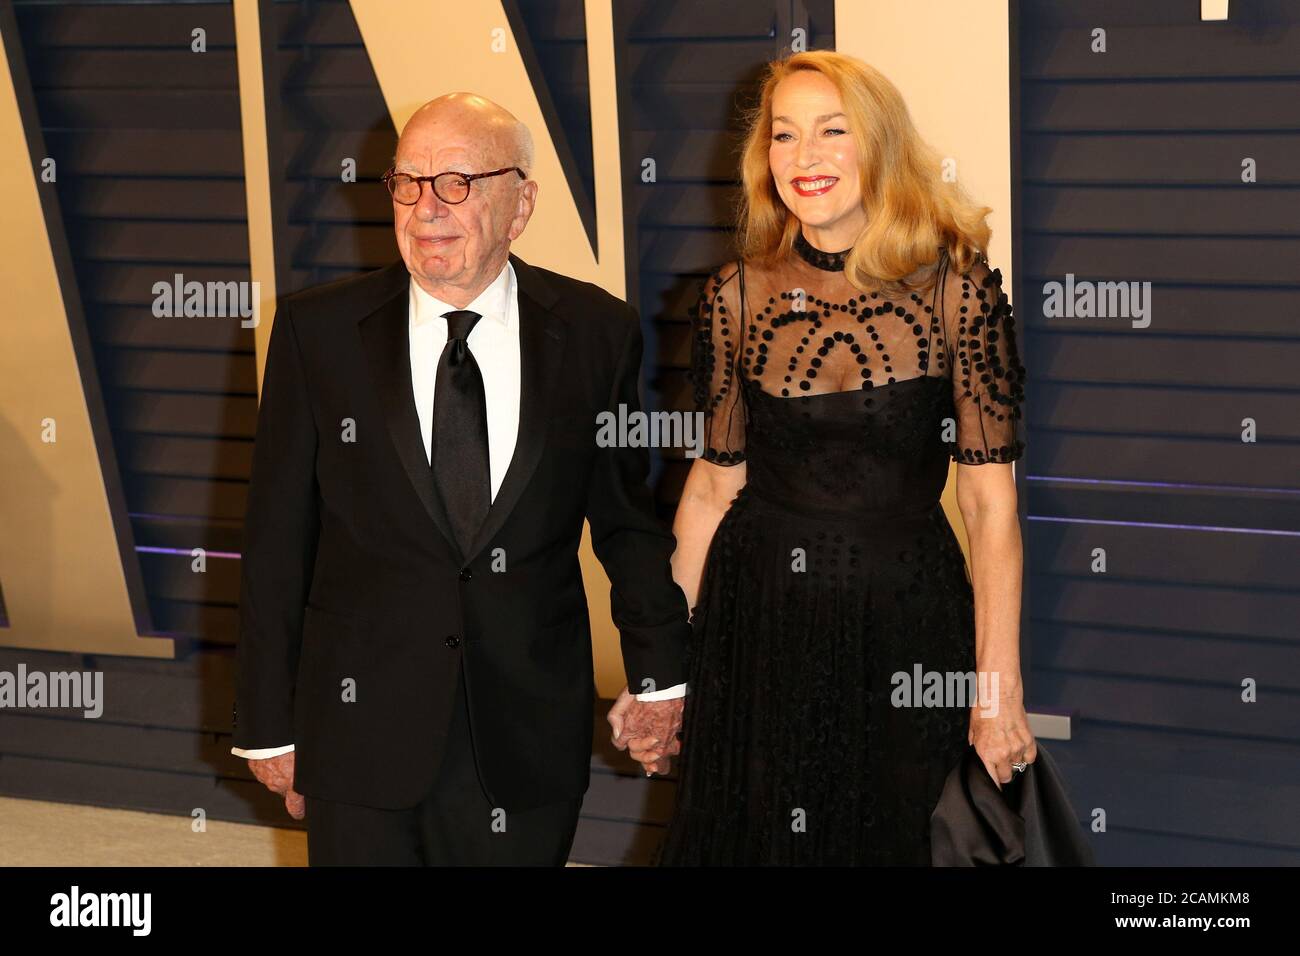 LOS ANGELES - FEB 24:  Rupert Murdoch, Jerry Hall at the 2019 Vanity Fair Oscar Party on the Wallis Annenberg Center for the Performing Arts on February 24, 2019 in Beverly Hills, CA Stock Photo